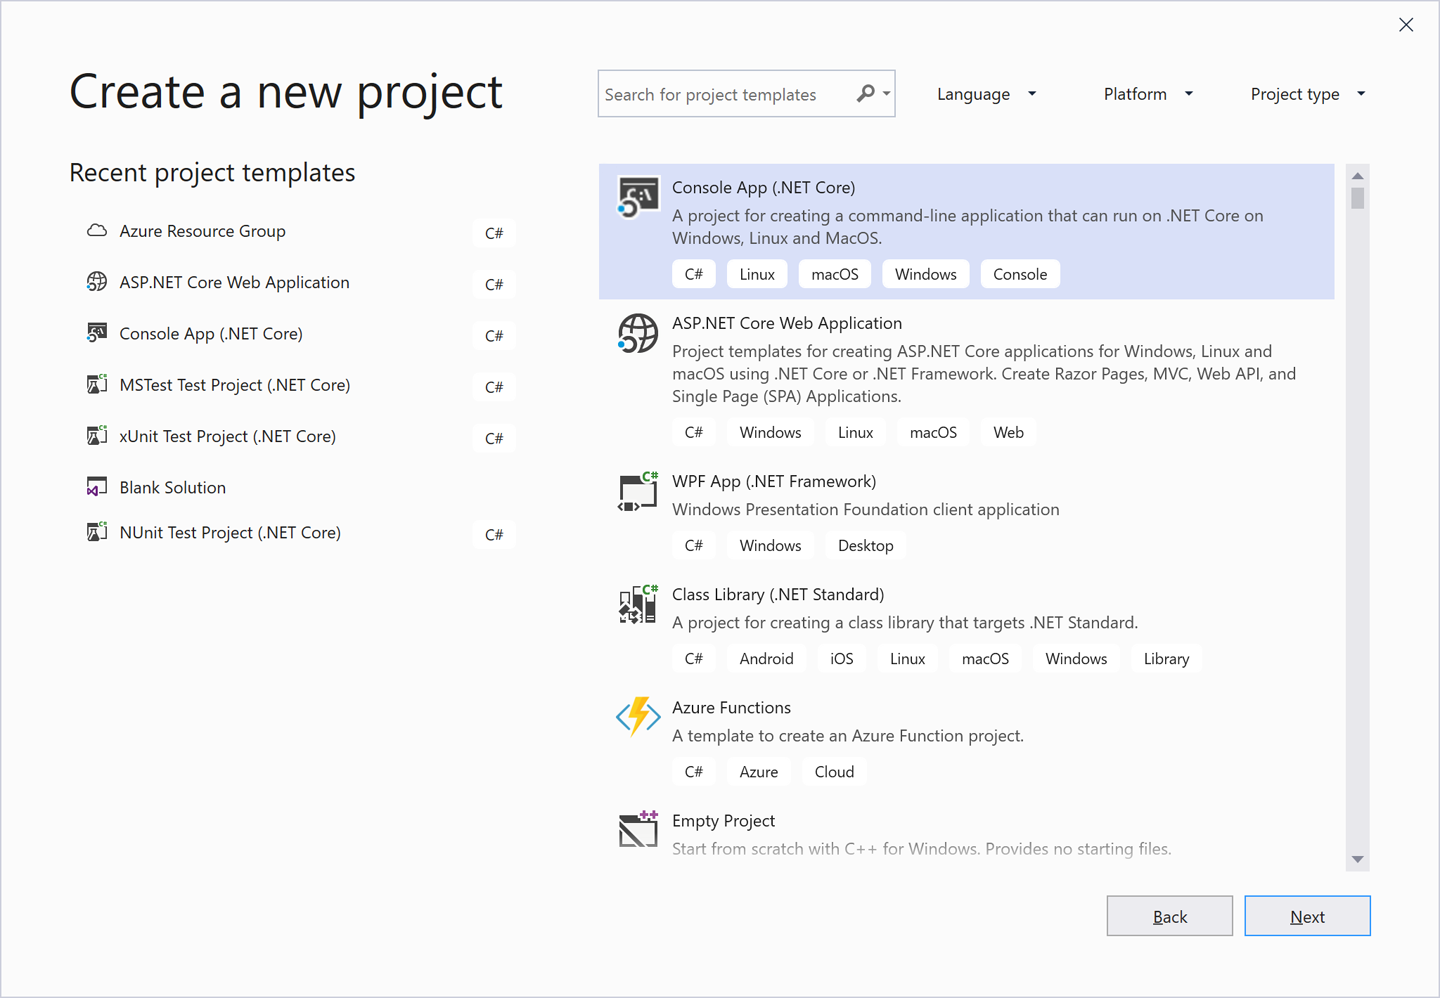 Visual Studio's Create a new project dialog